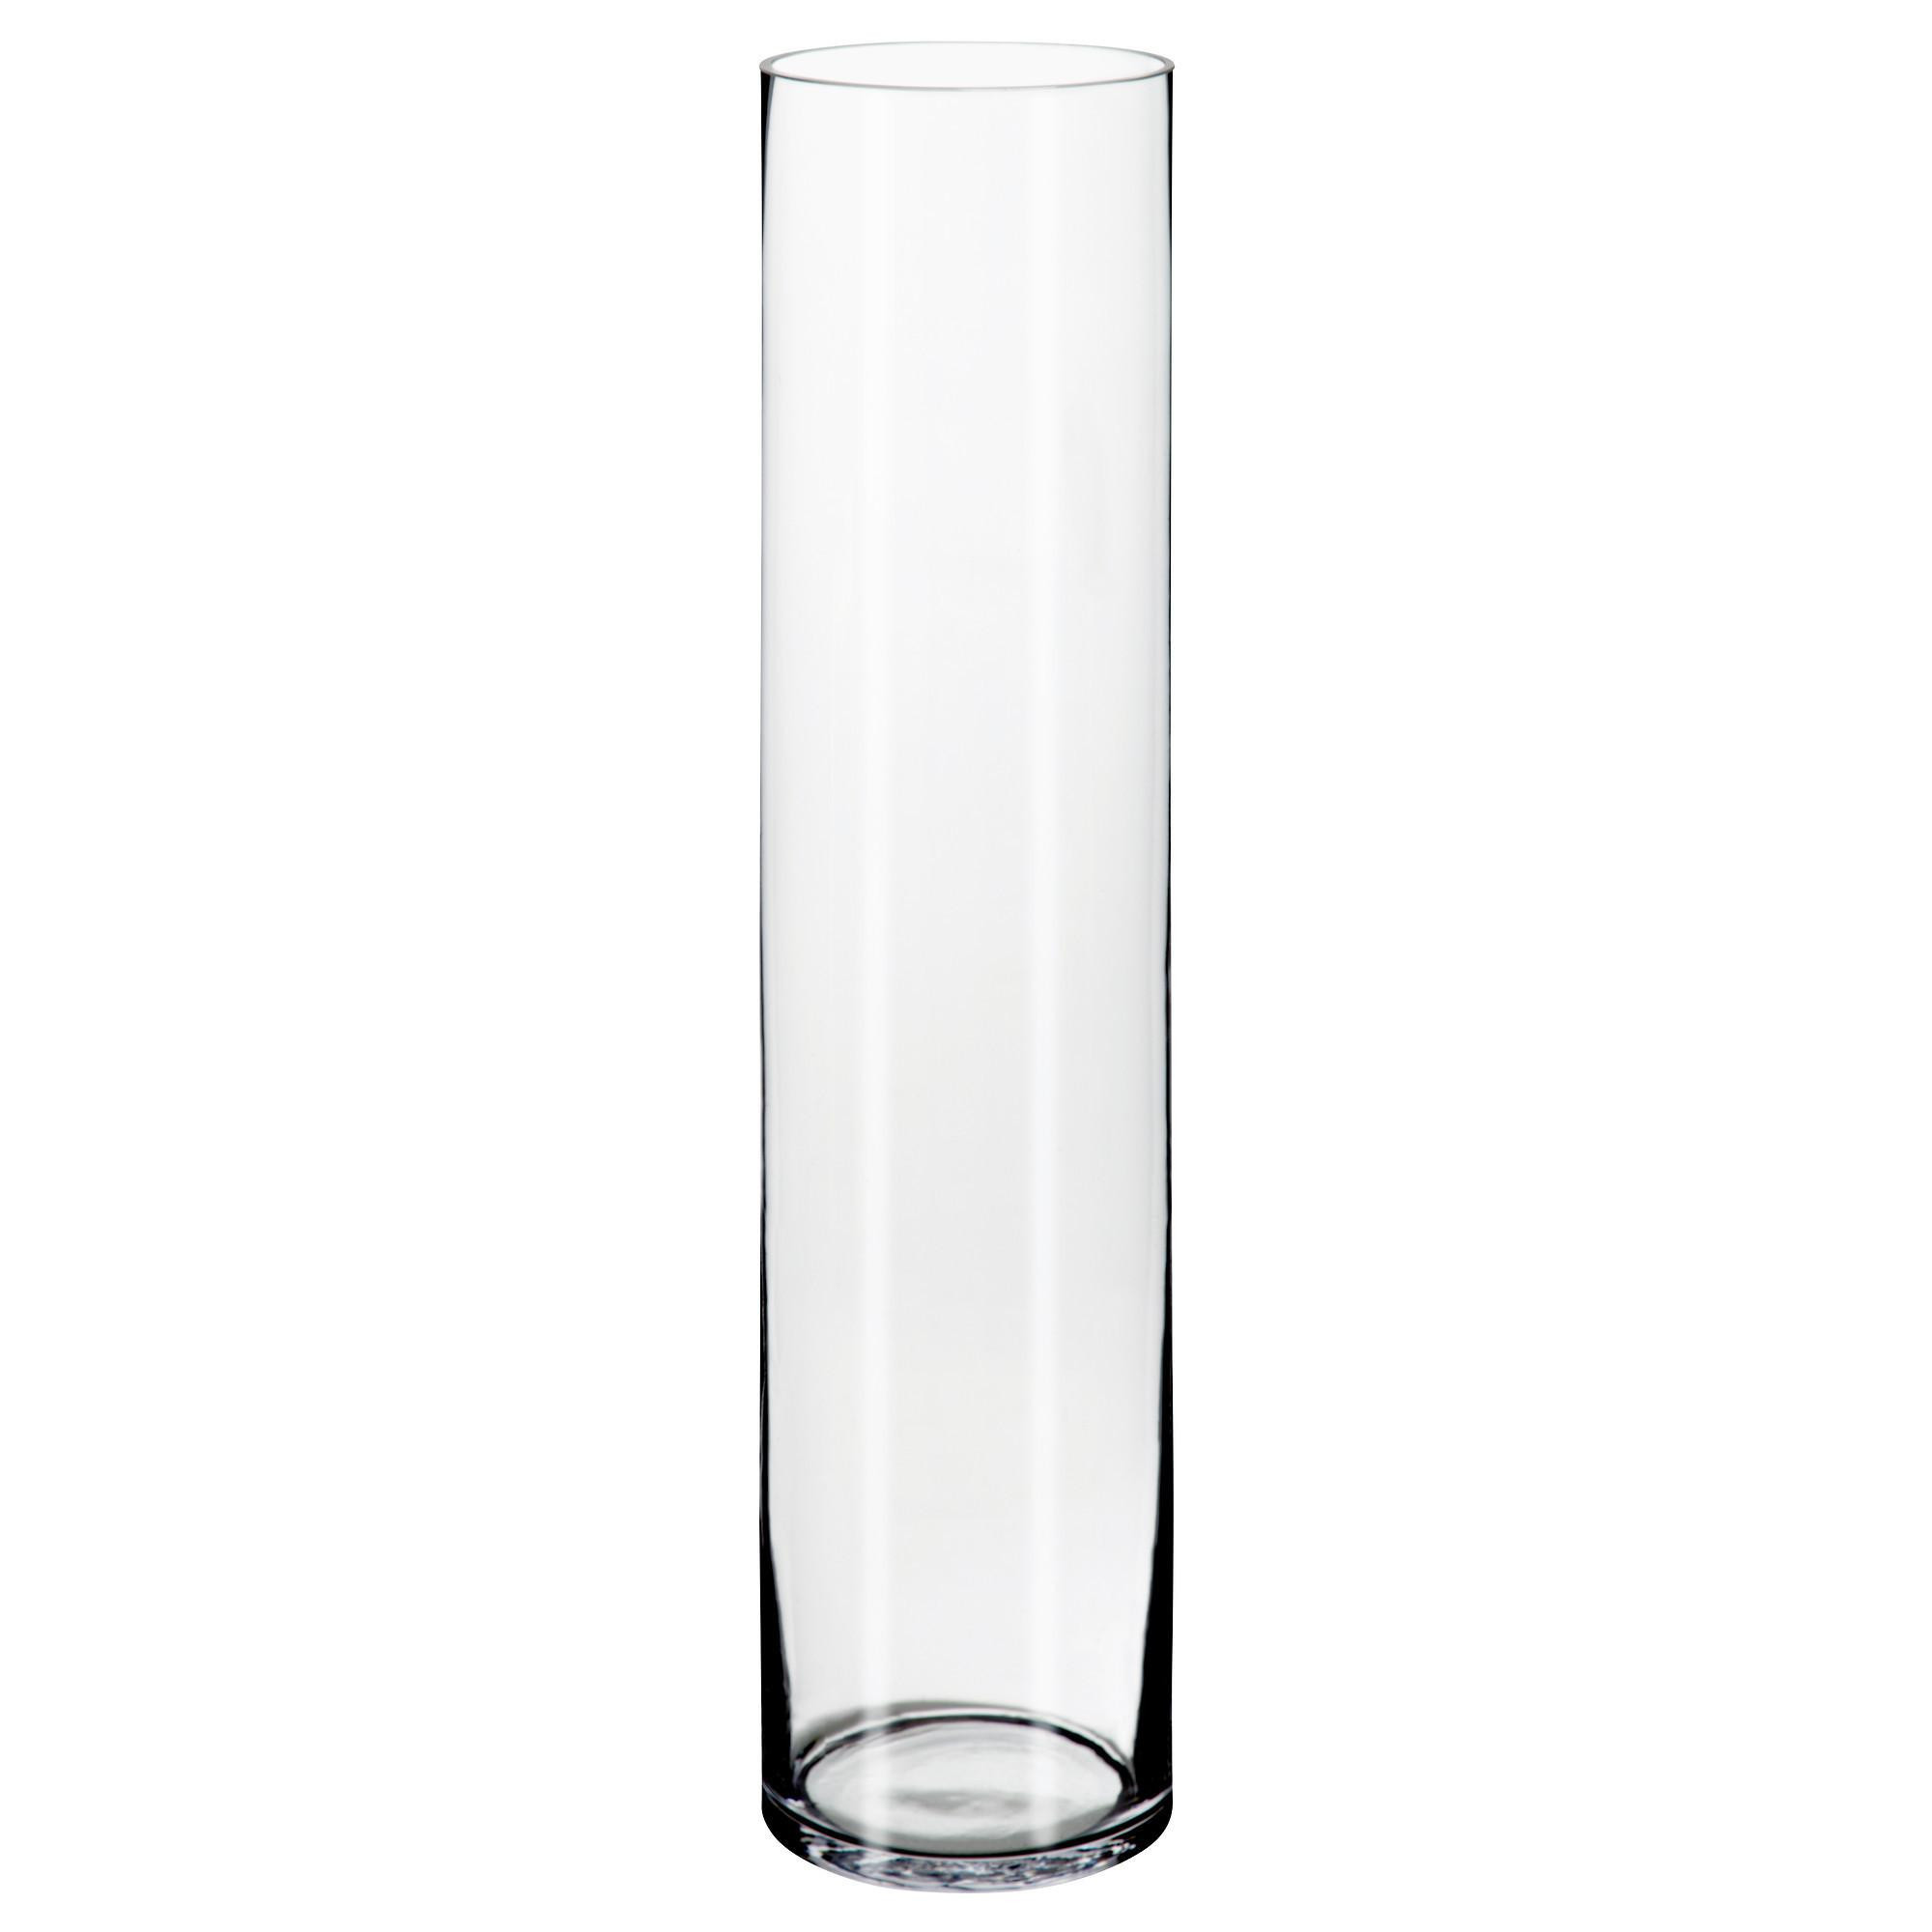 30 Lovely Ikea Rectangle Vase 2023 free download ikea rectangle vase of white glass bowl image ikea white chair unique living room vase intended for white glass bowl image ikea white chair unique living room vase glass fresh pe s5h vases